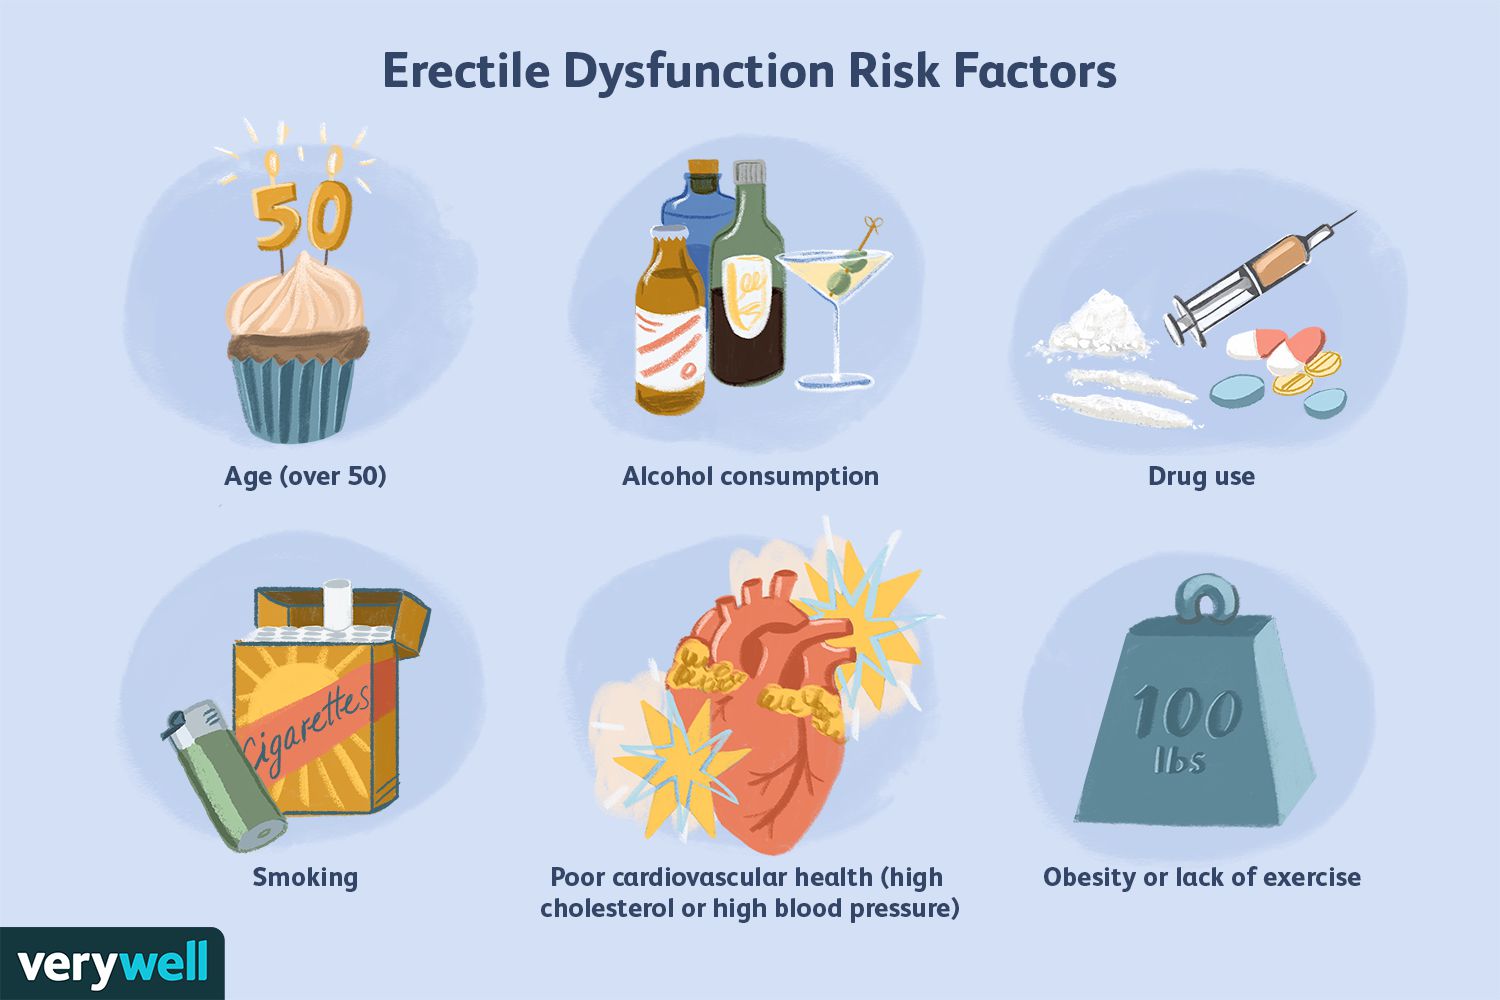 Can Caffeine Cause Erectile Dysfunction?